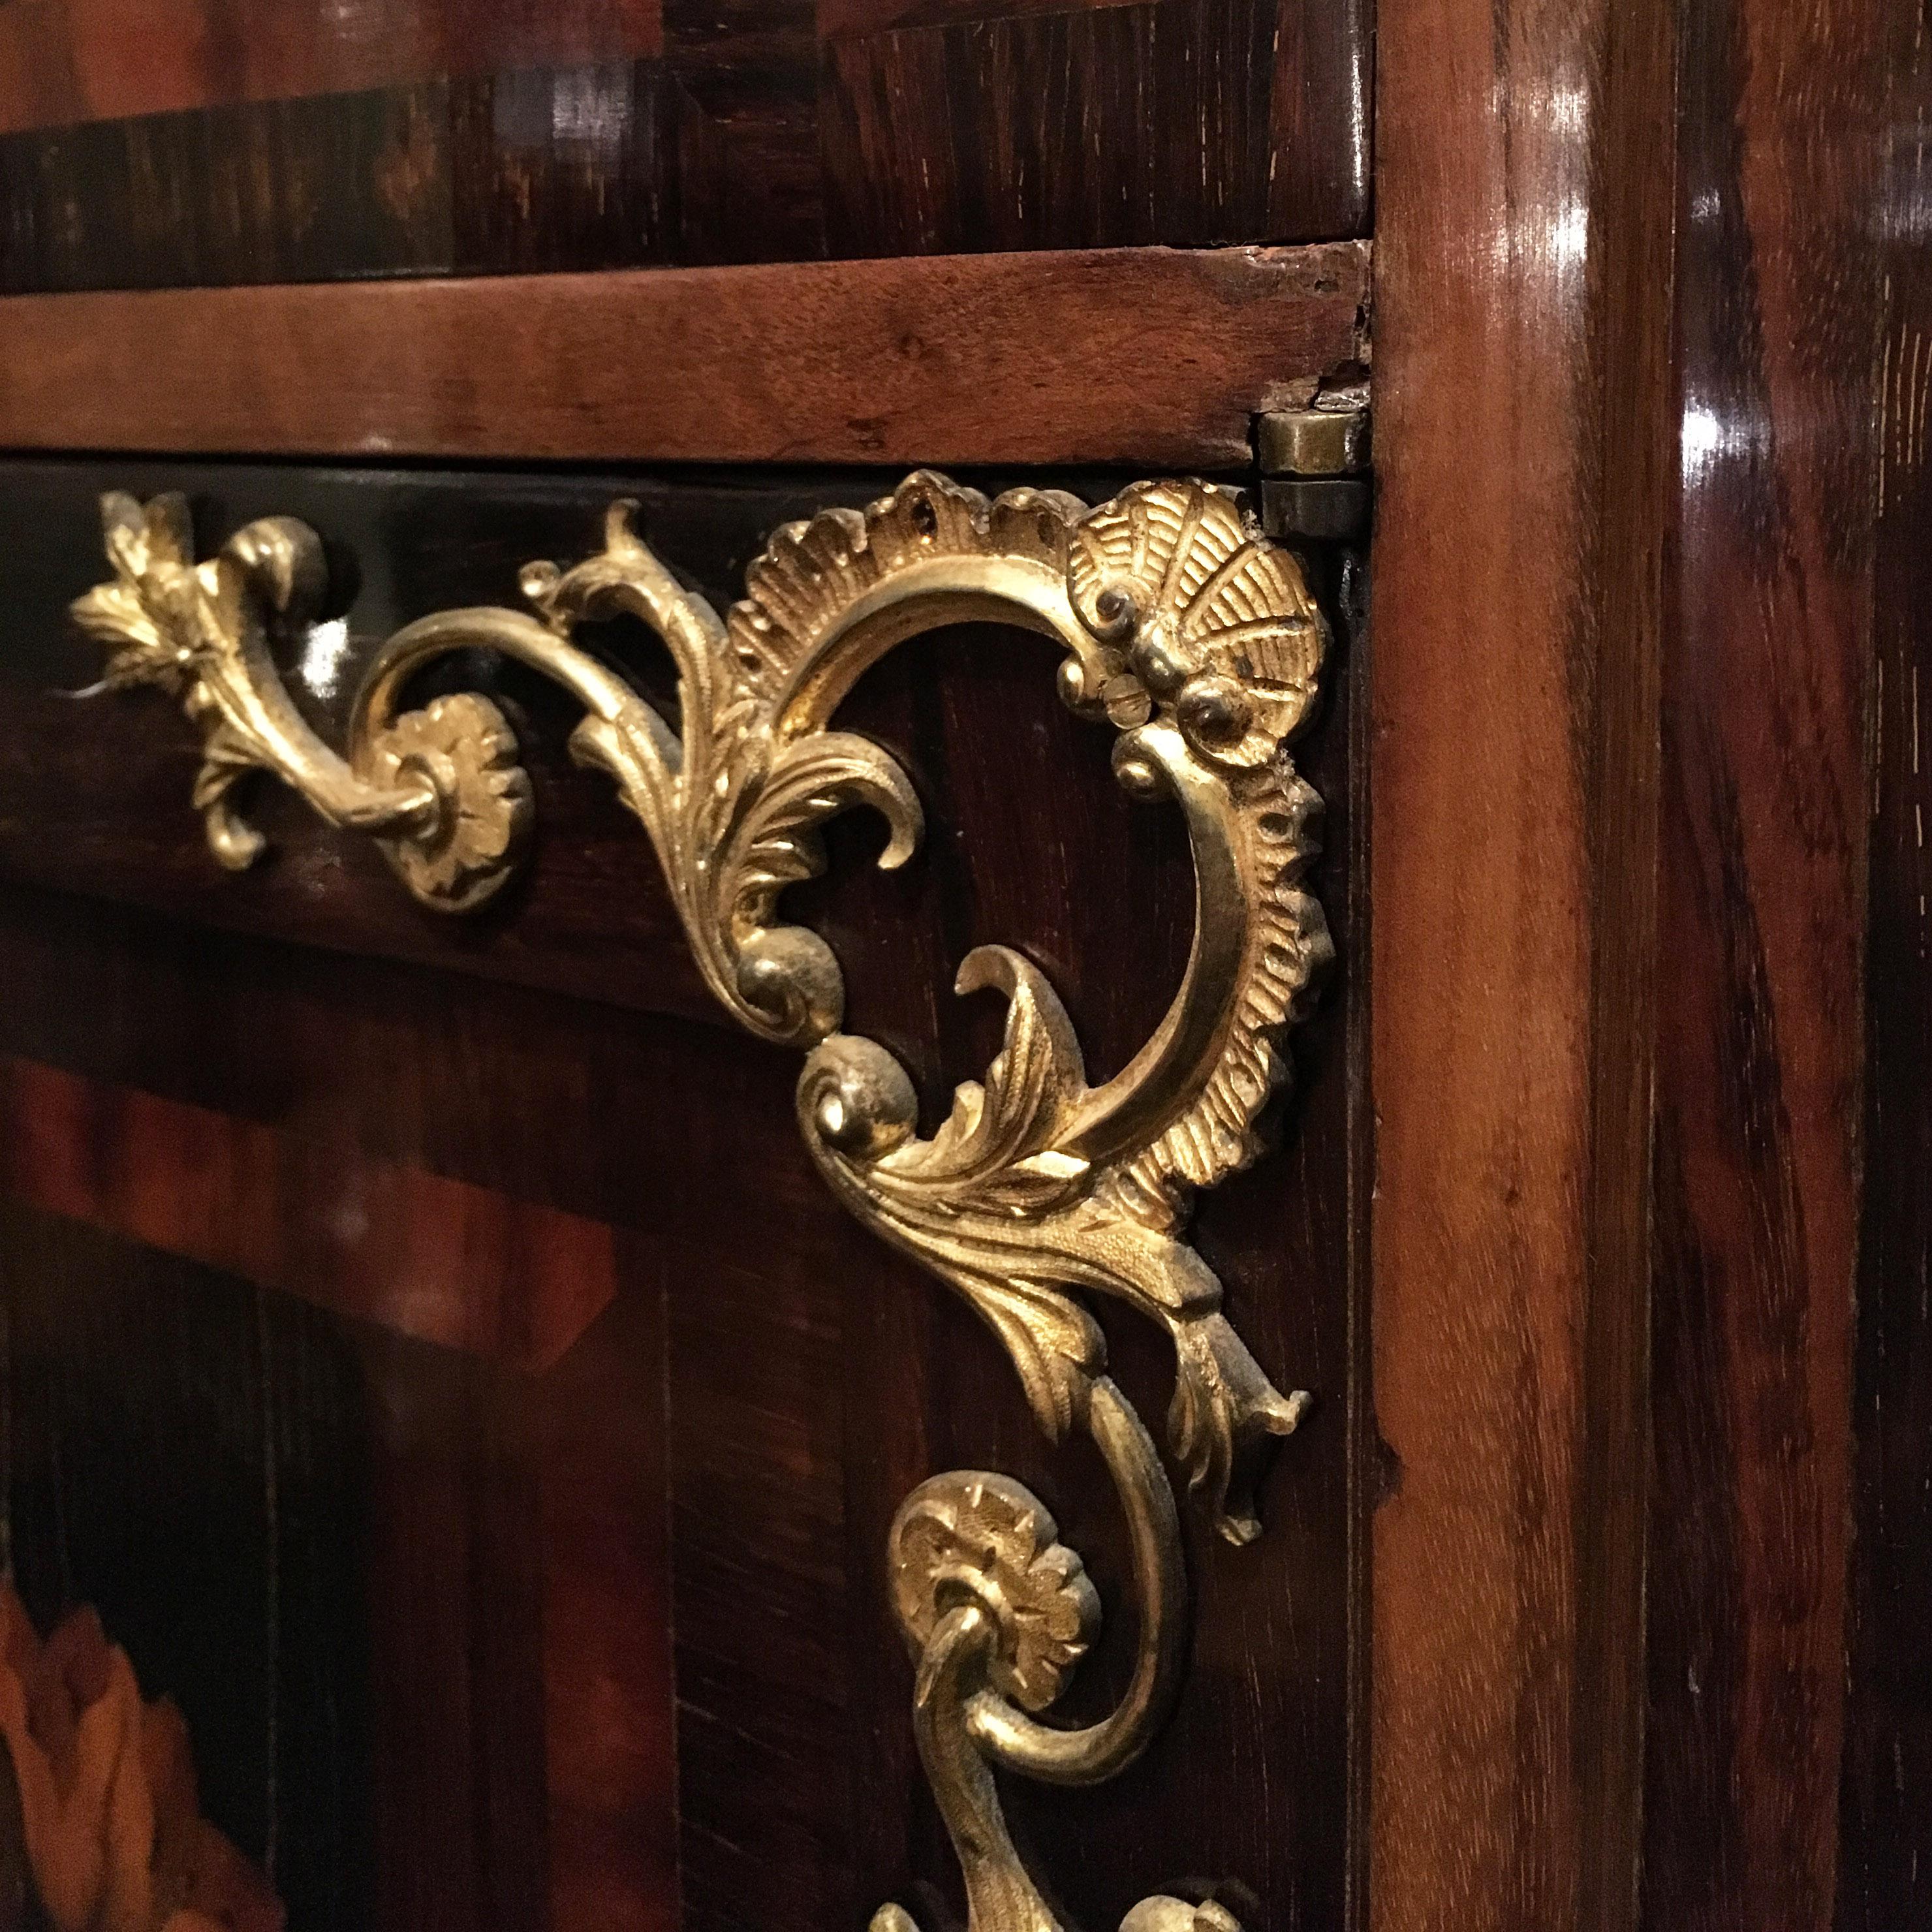 An elegant French Napoleon III credenza in rosewood, palisander and walnut wood.
The credenza presents one door and two drawers, one on the top and the other one on the bottom of the piece, beautiful ormolu mountings and a red marble top.
France,